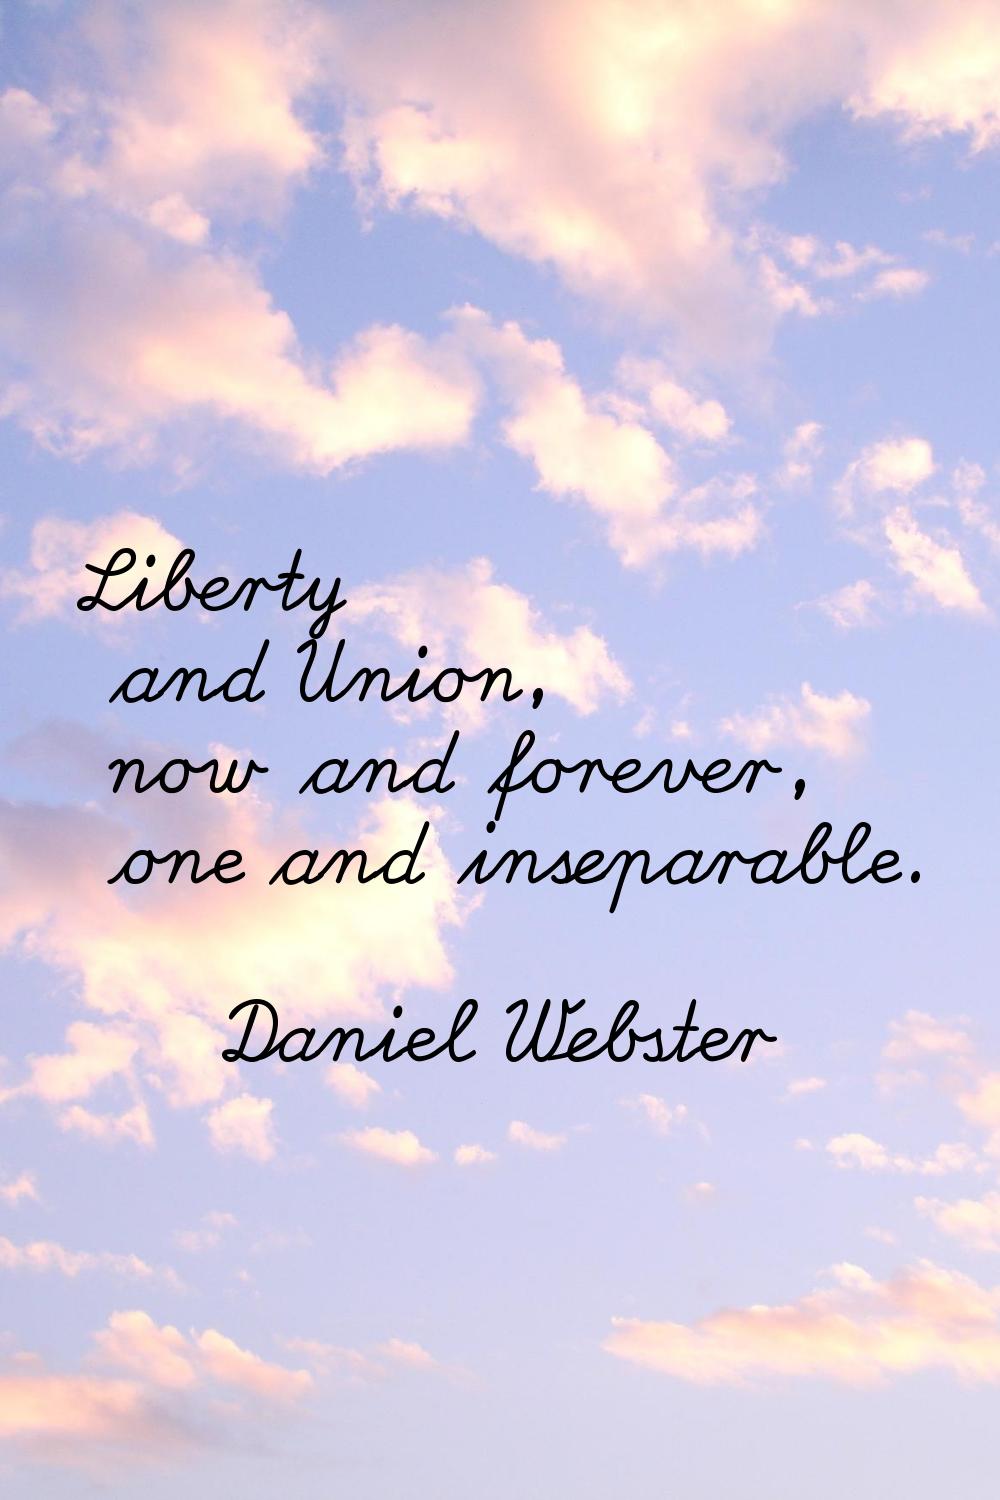 Liberty and Union, now and forever, one and inseparable.